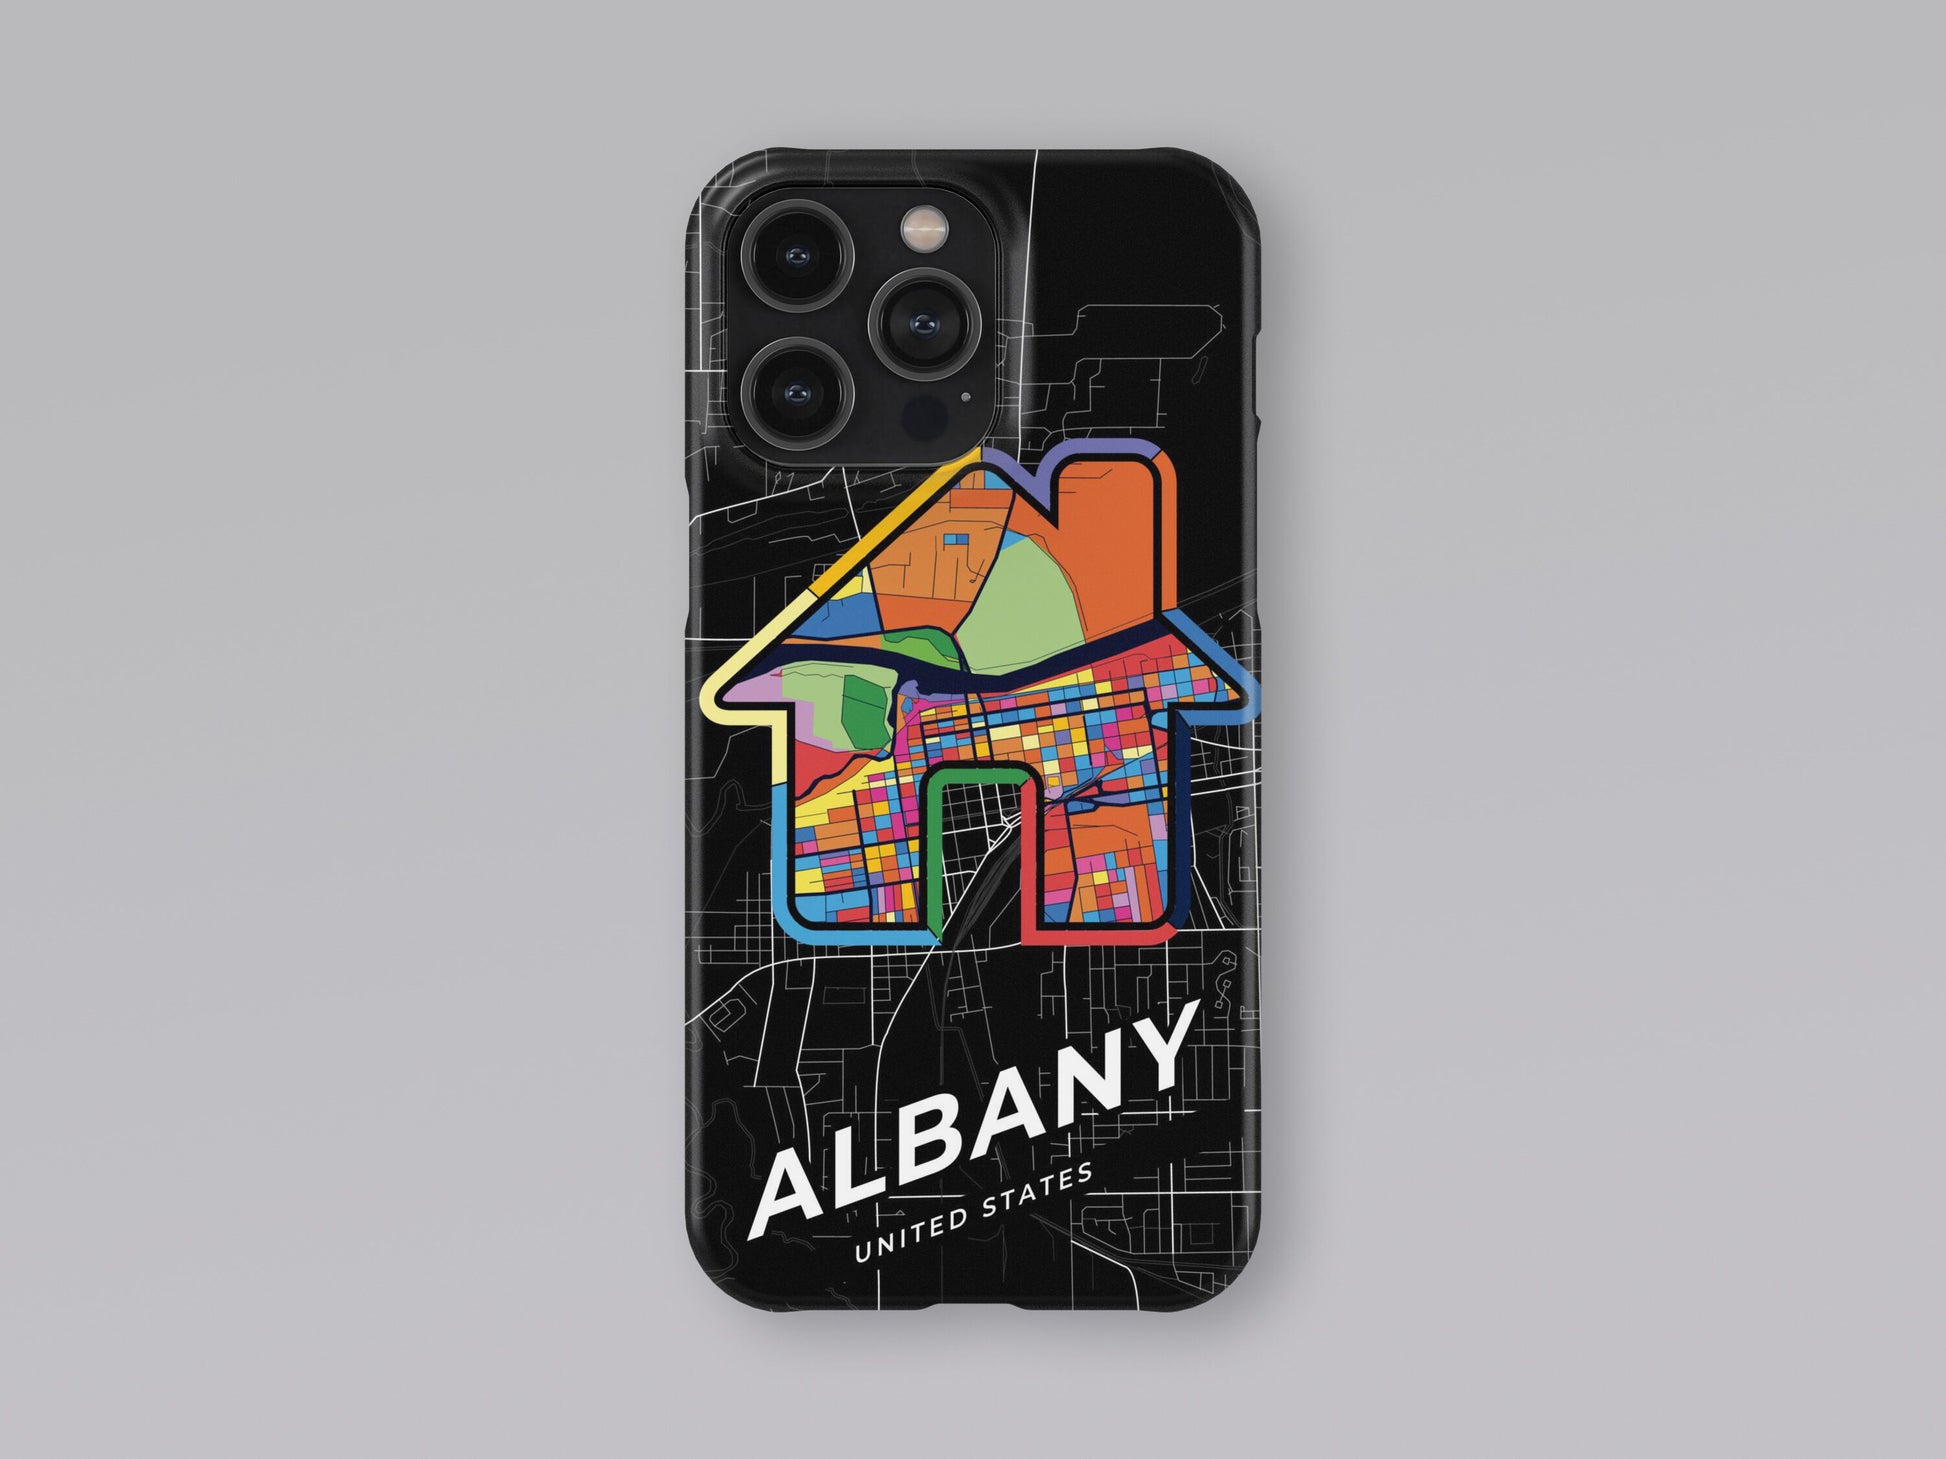 Albany Oregon slim phone case with colorful icon. Birthday, wedding or housewarming gift. Couple match cases. 3